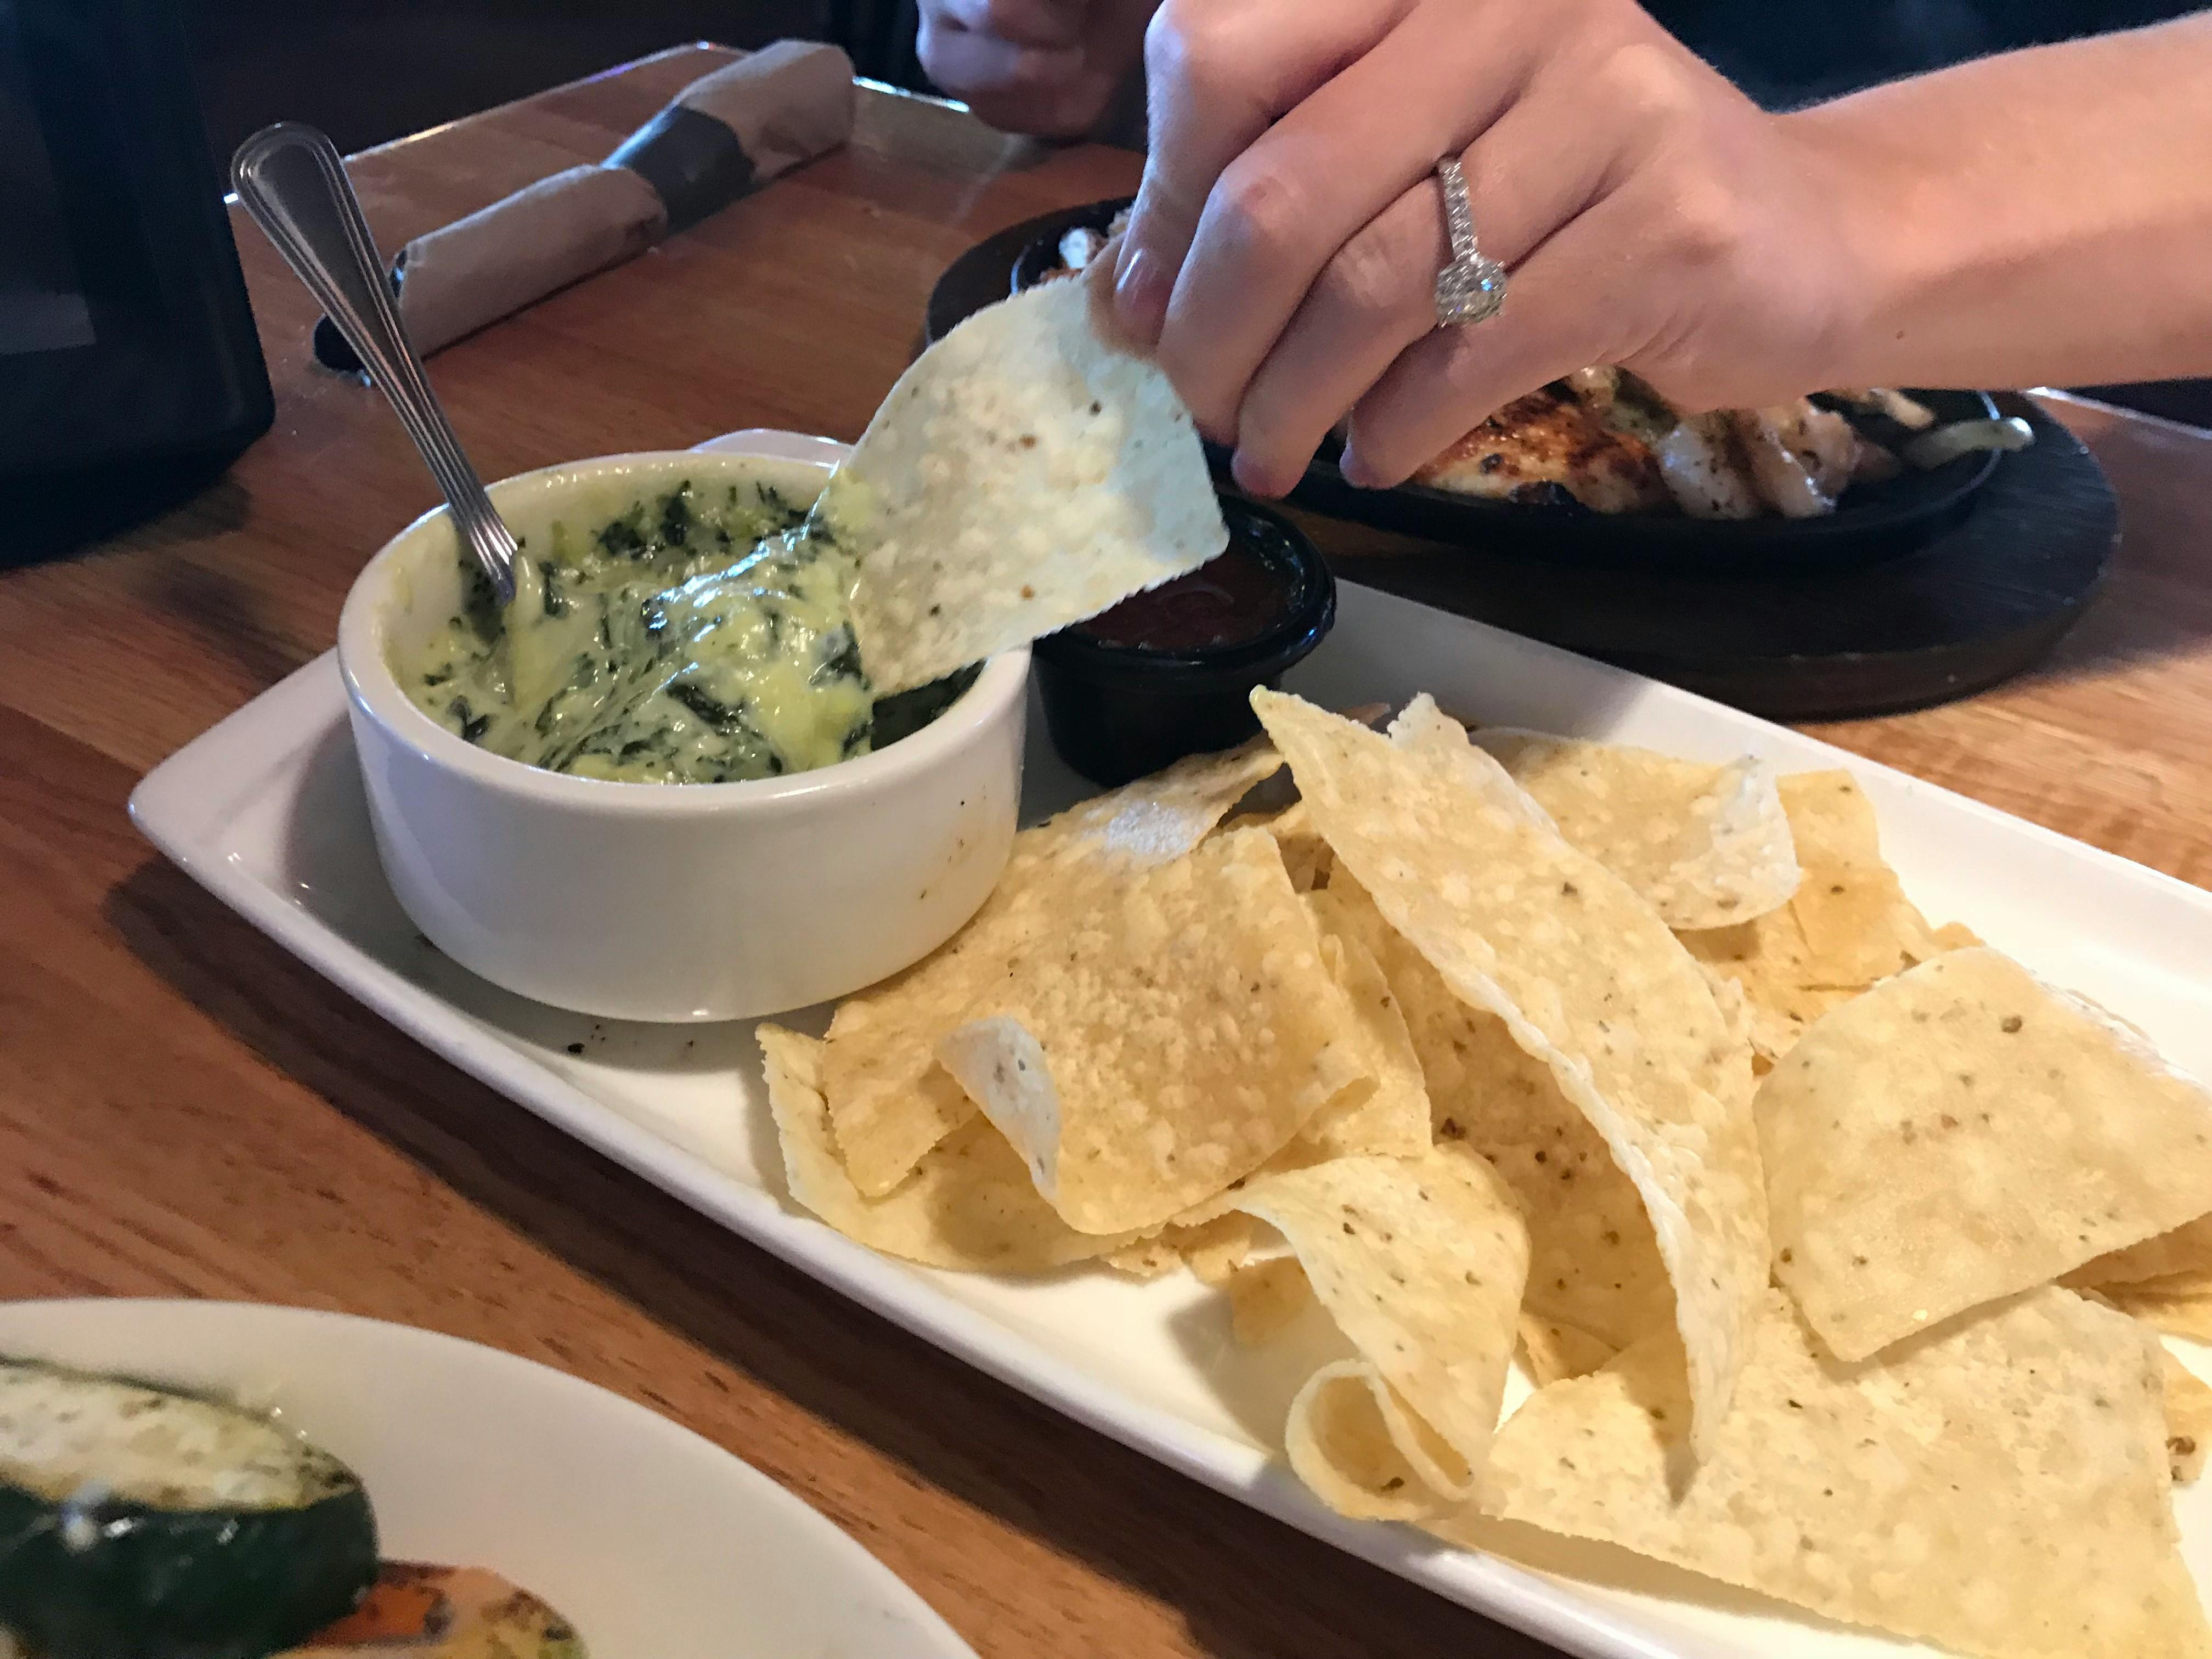 A person's hand dipping a tortilla chip into a bowl of Applebee's Spinach Artichoke dip next to more tortilla chips on a platter.